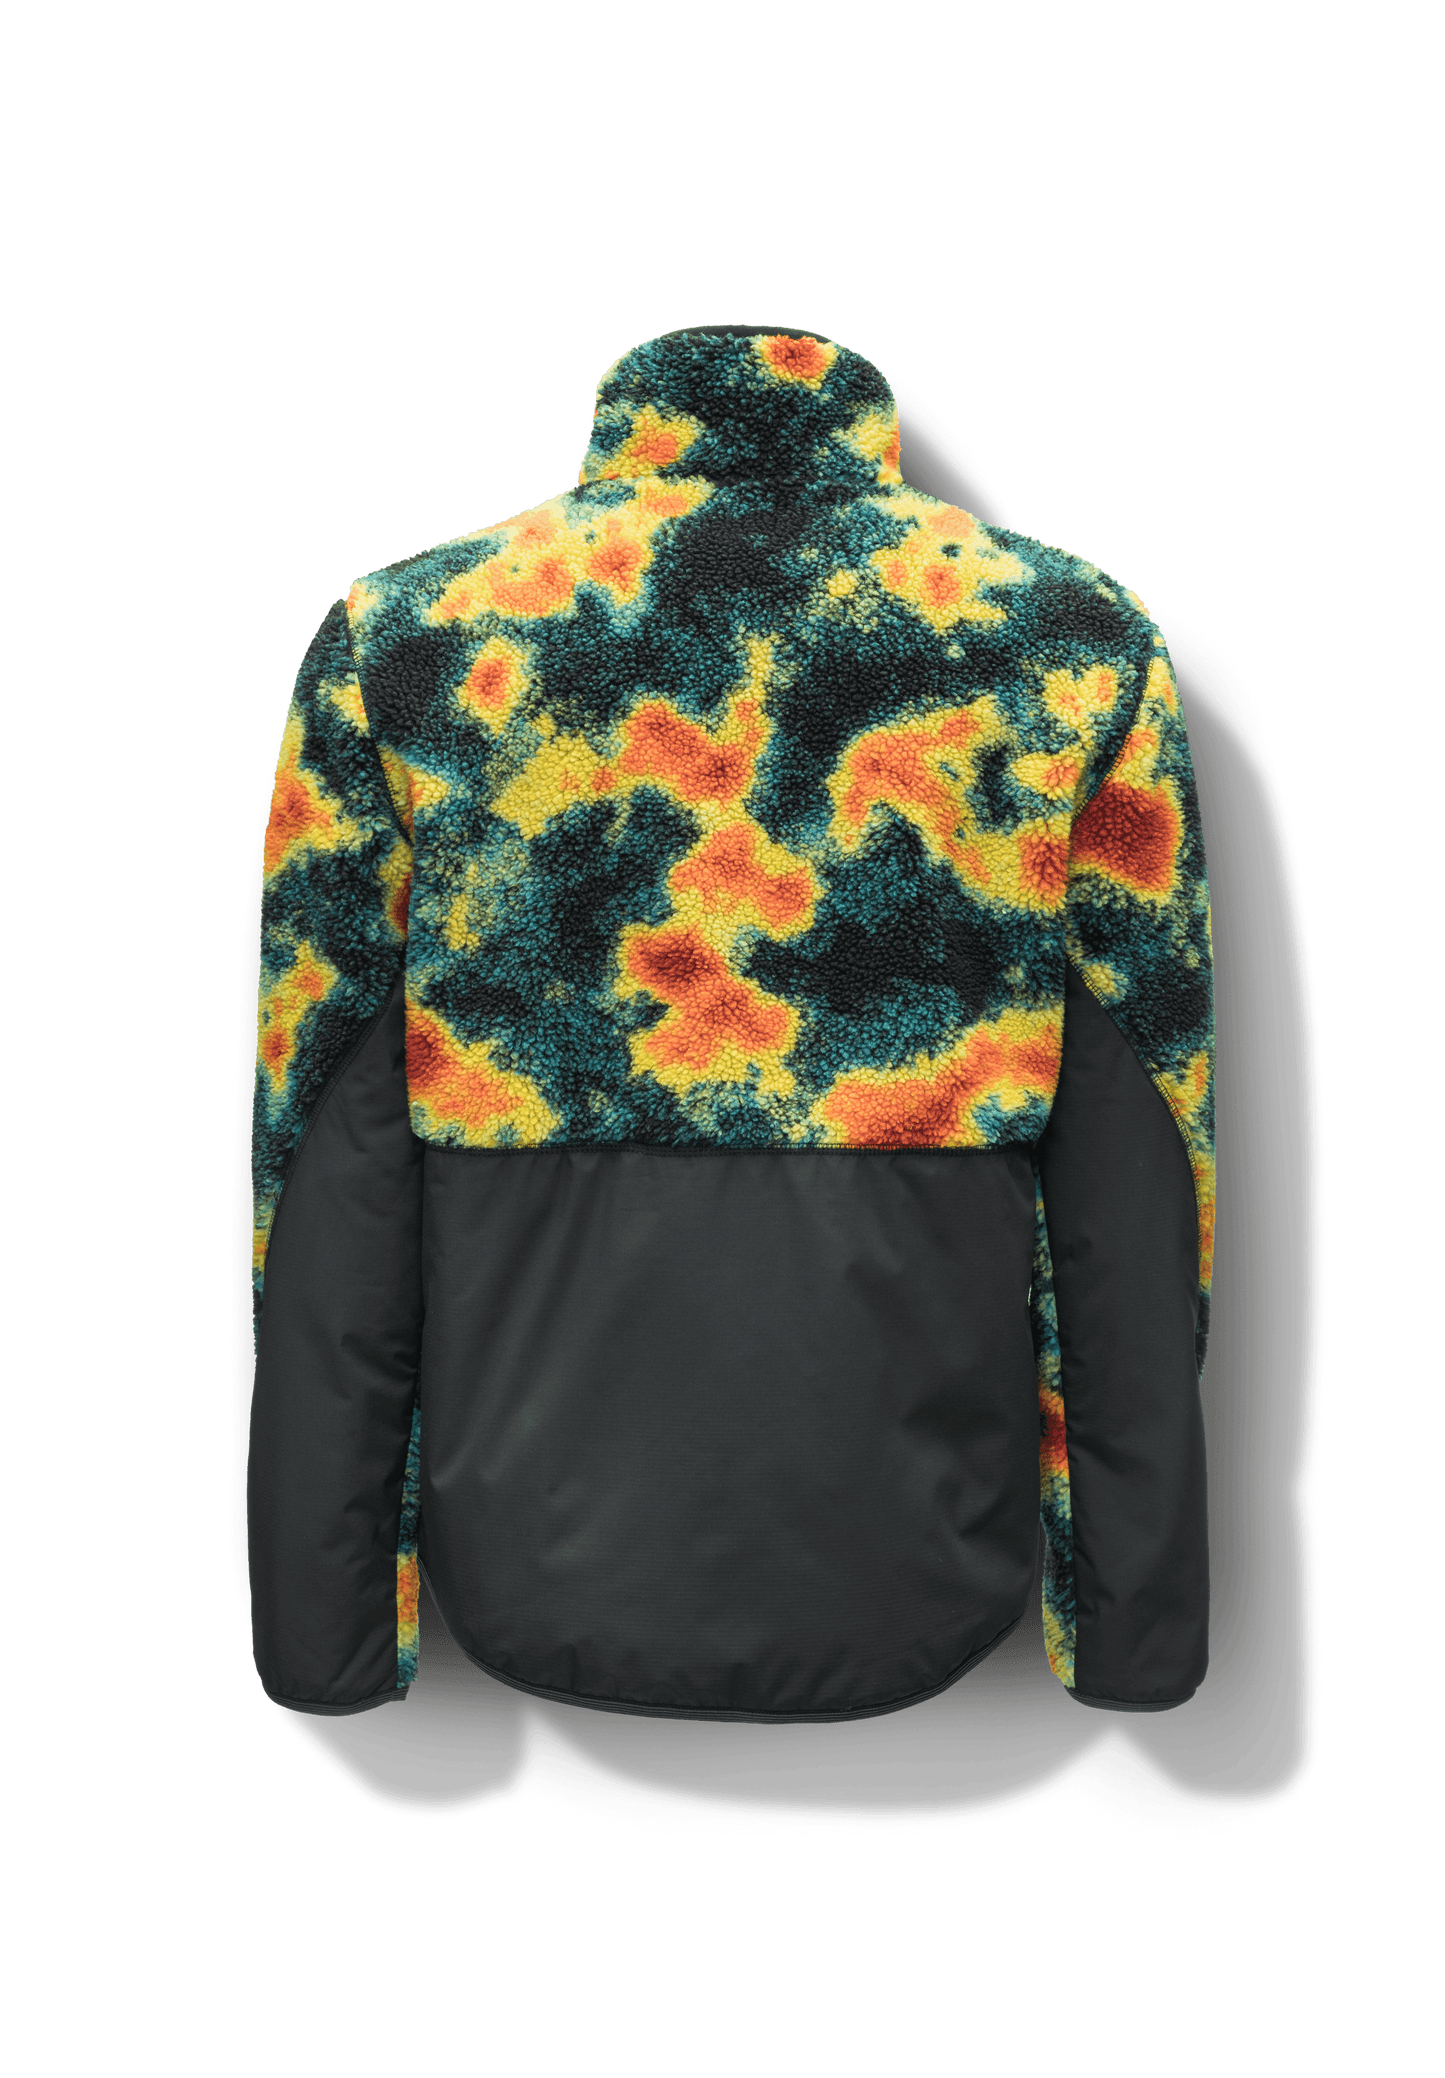 Kepler Men's Berber Zip Front Sweater in hip length, premium berber and stretch ripstop fabrication, Primaloft Gold Insulation Active+, two-way centre-front zipper, zipper pocket at left chest, magnetic closure flap pockets at waist with additional side-entry pockets, in Heat Map